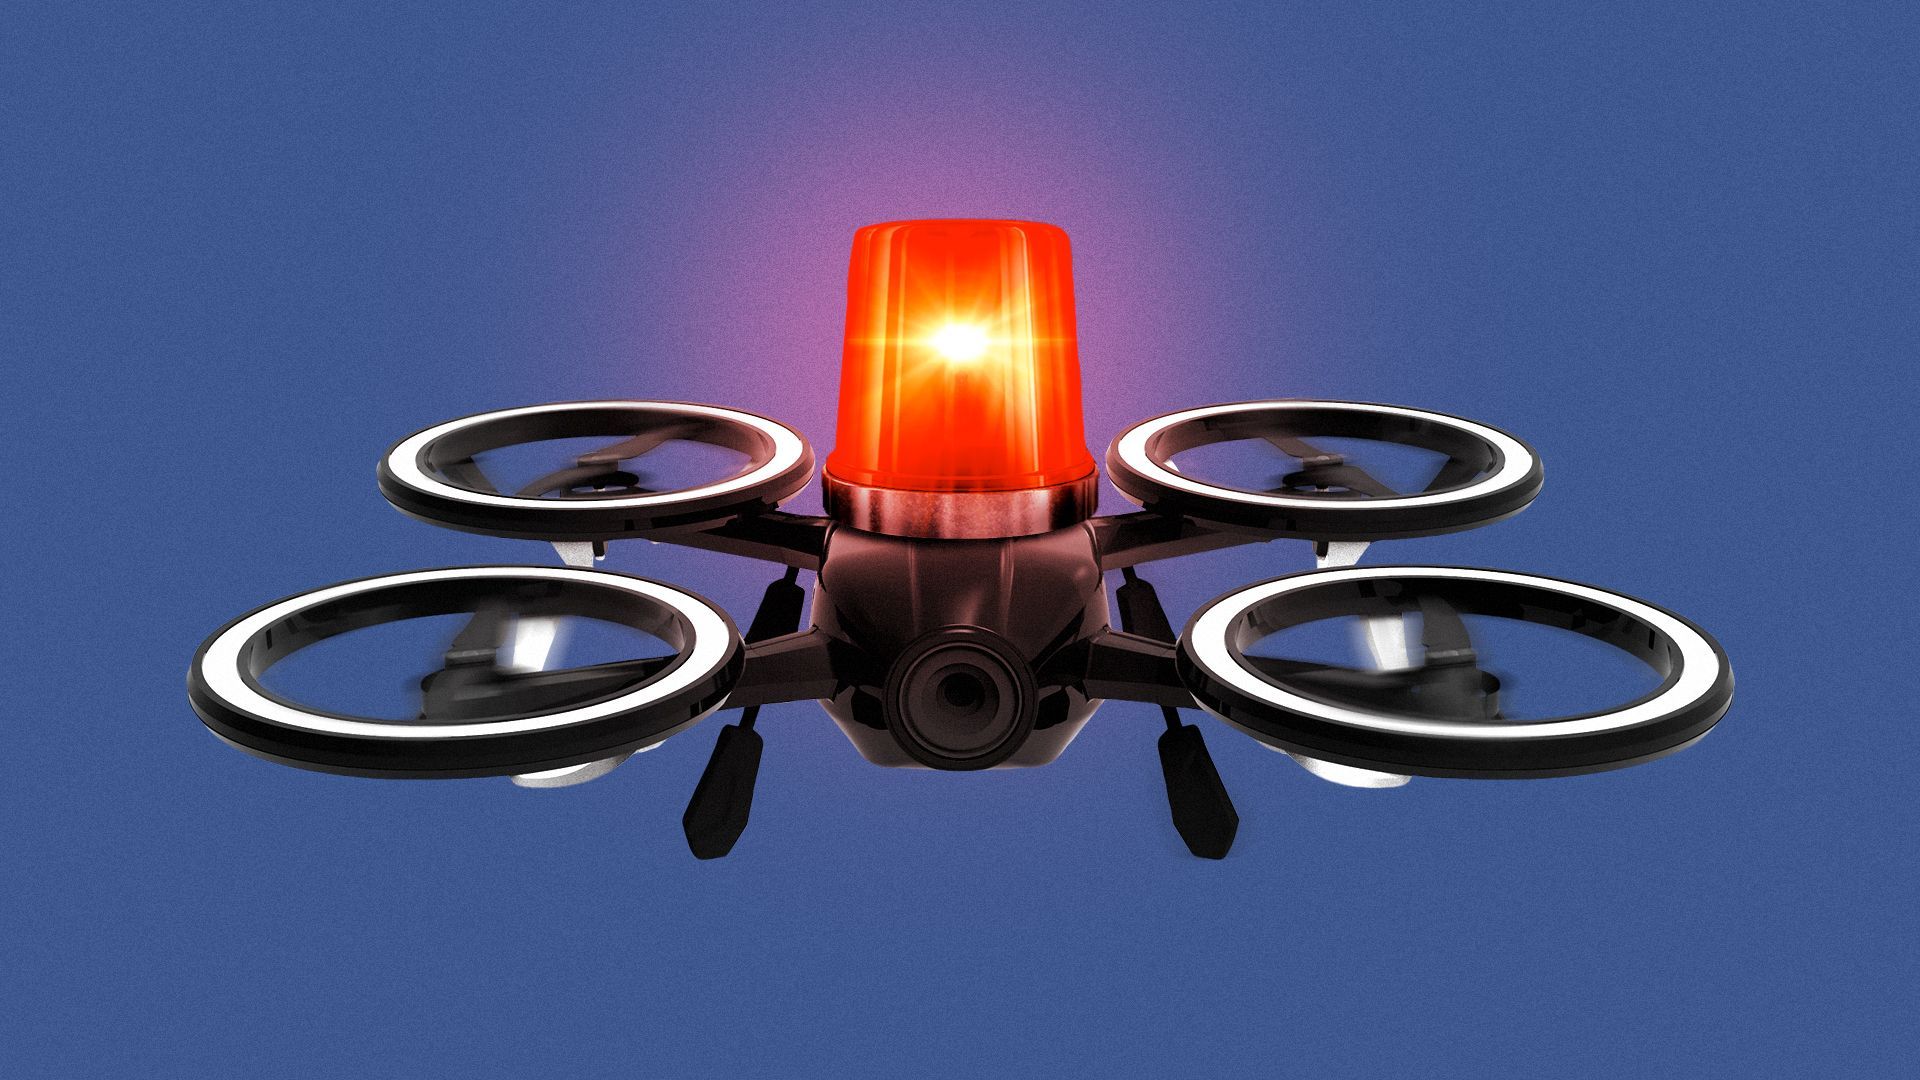 Illustration of a police light on a drone.